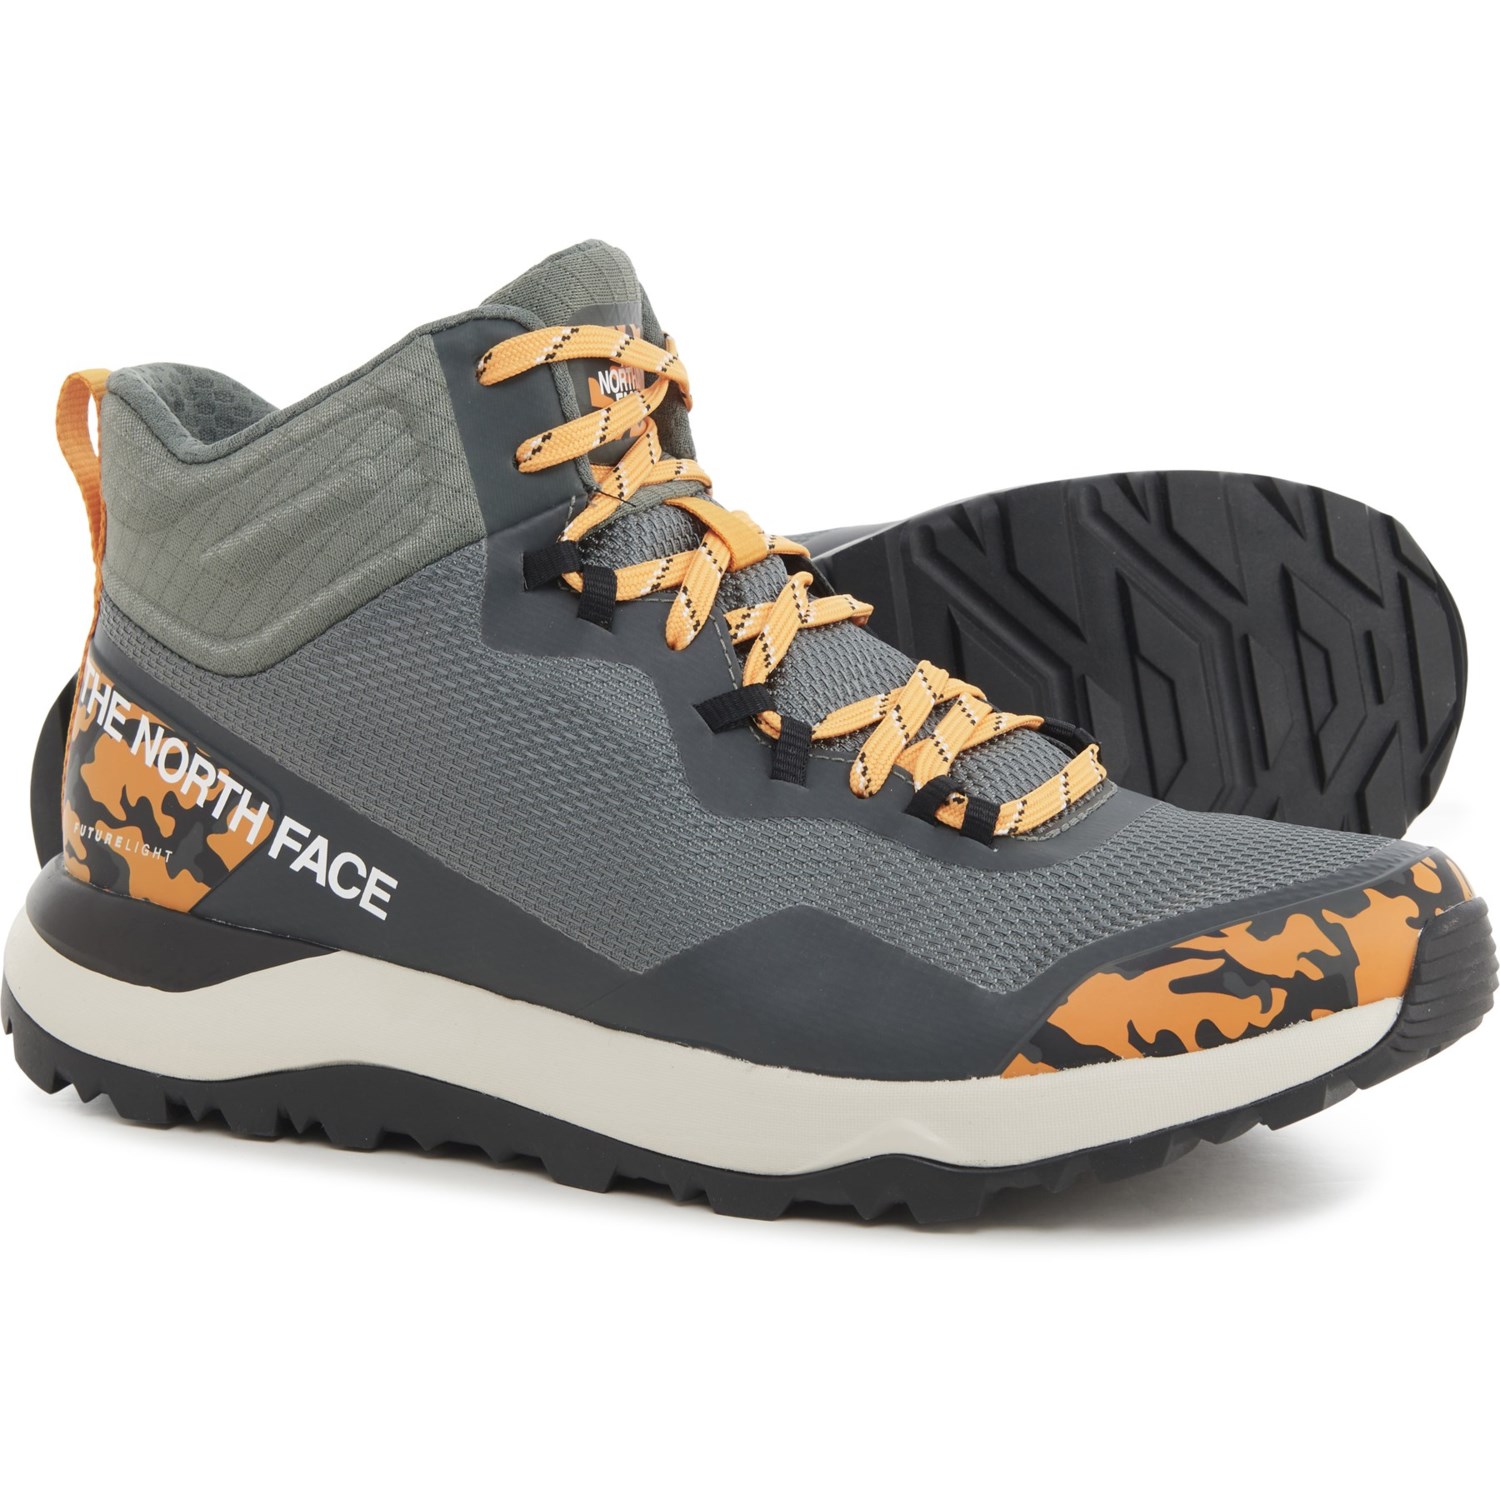 The North Face Activist Mid FUTURELIGHT Hiking Boots - Waterproof (For Men)